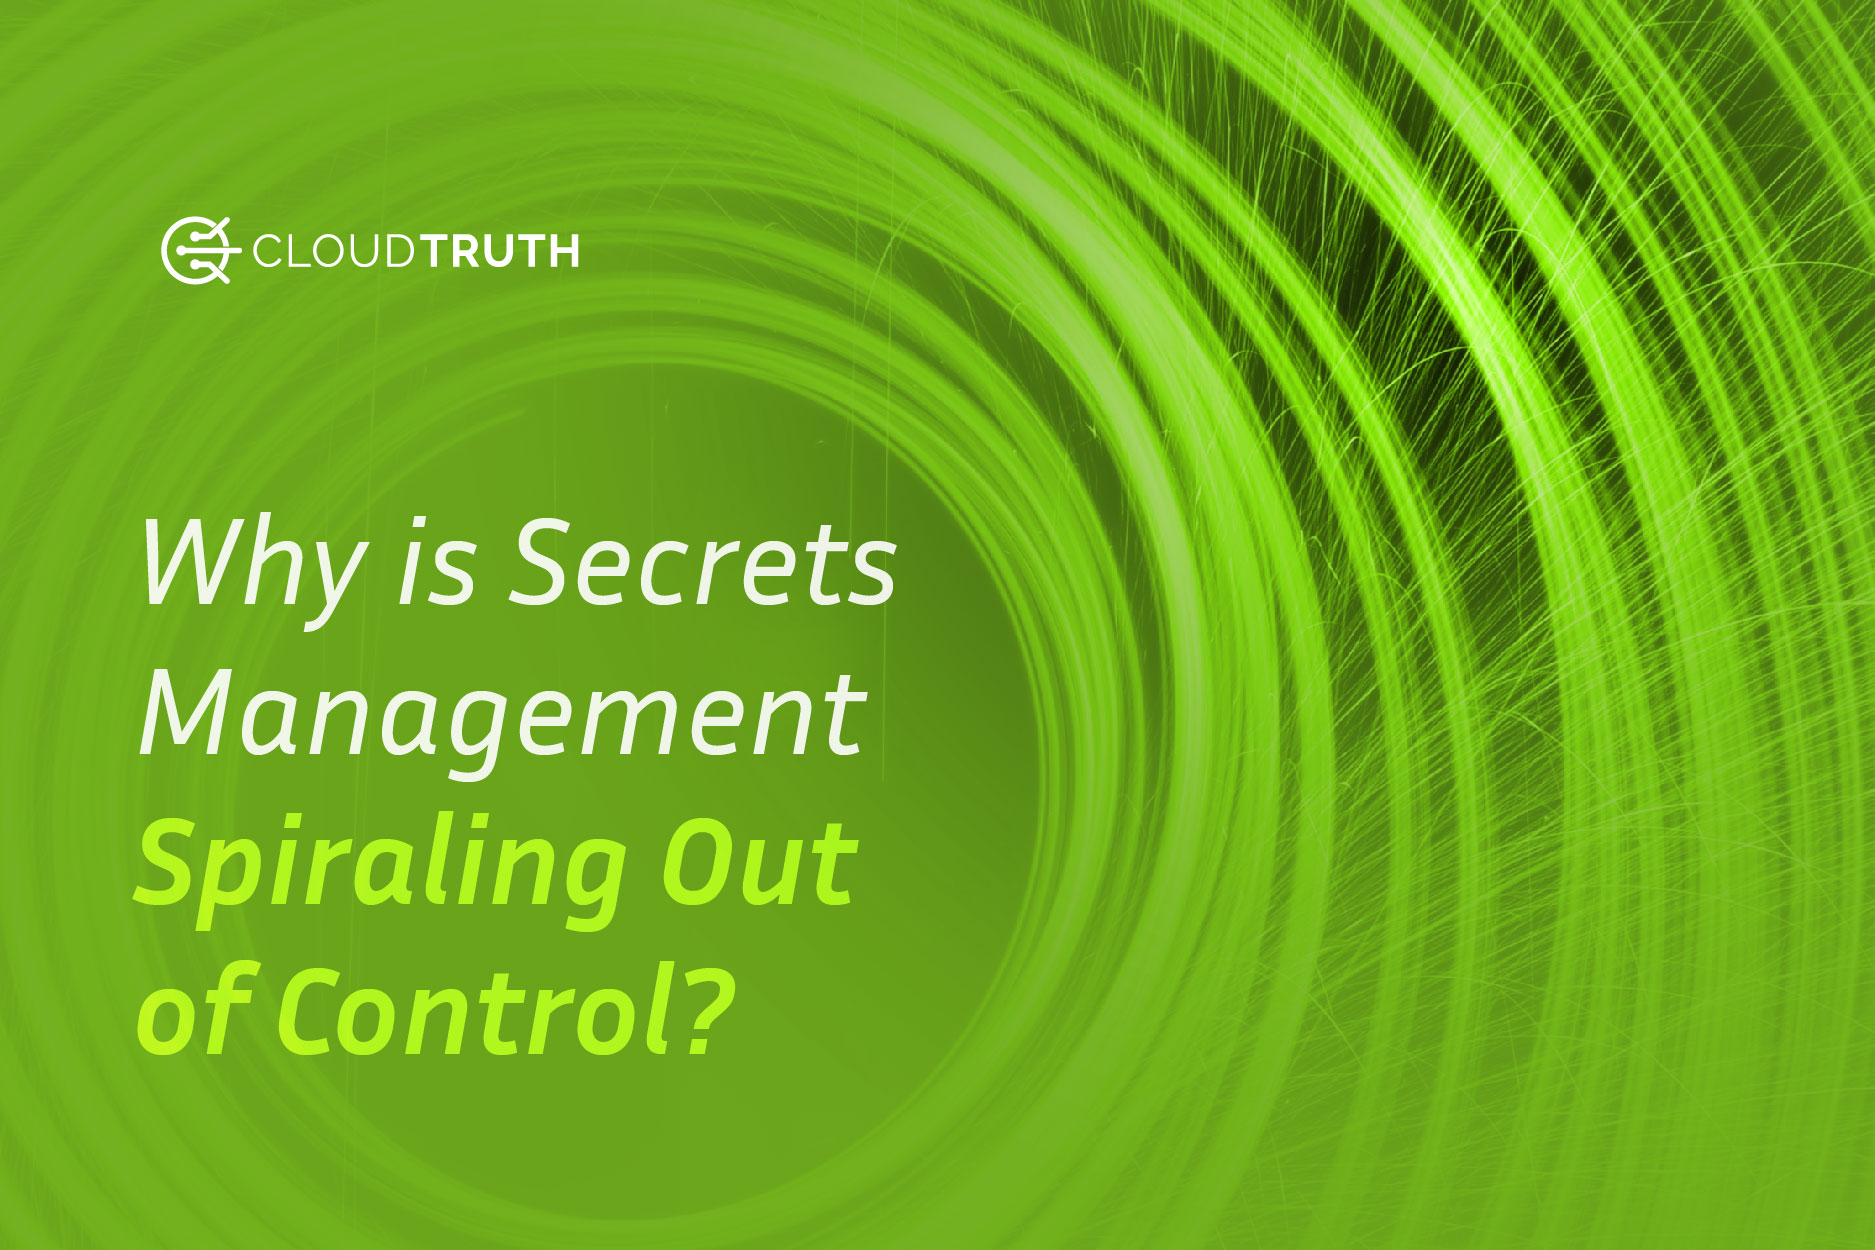 Why is Secrets Management Spiraling Out of Control?